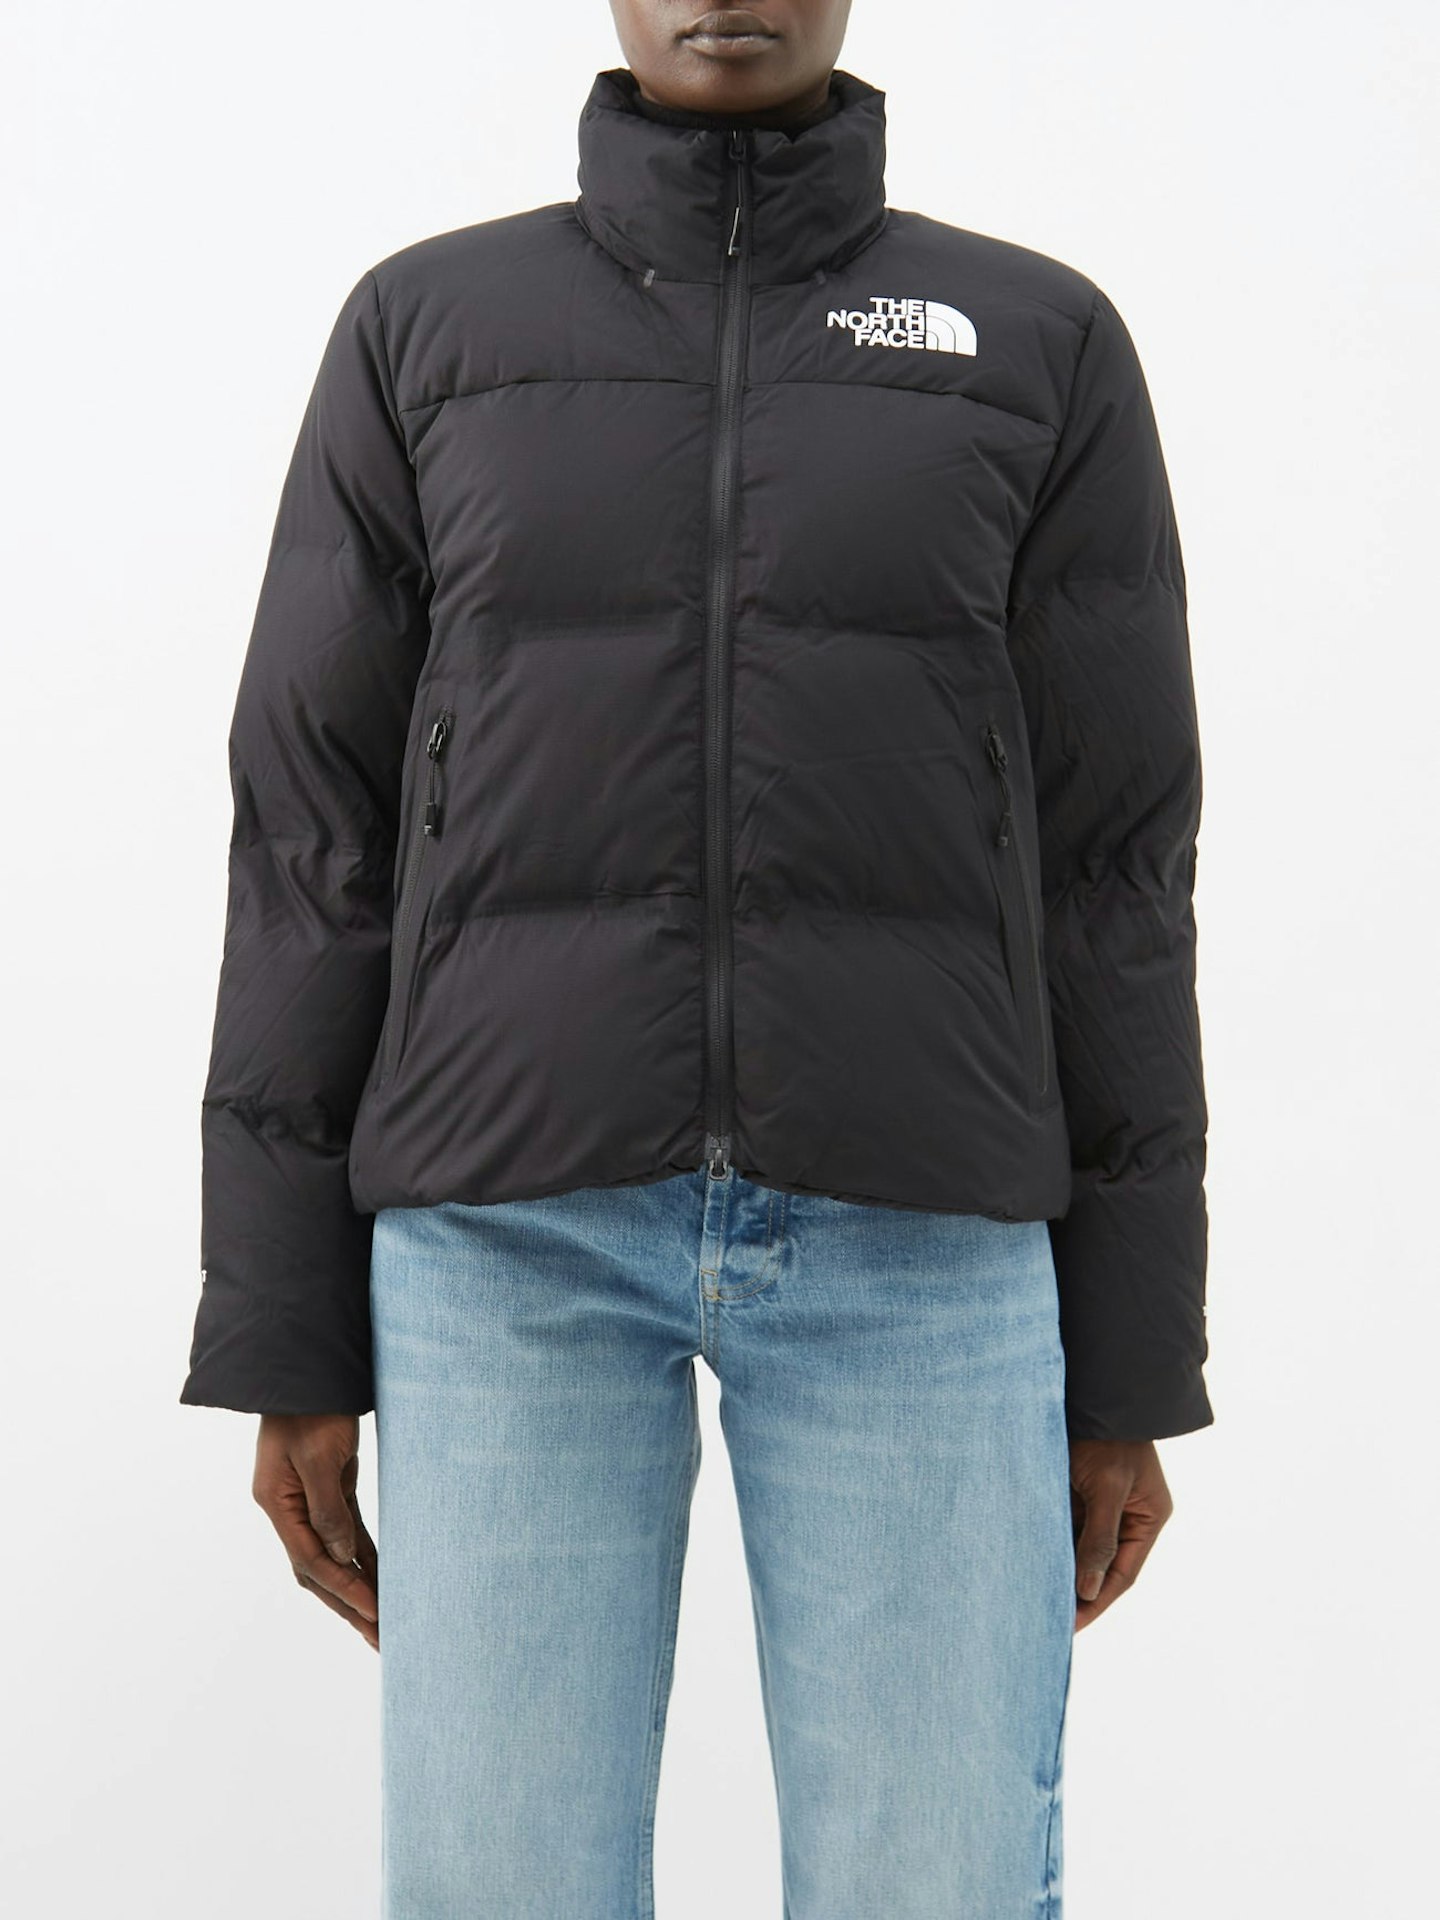 Kendall Jenner Keeps Wearing This North Face Puffer Coat